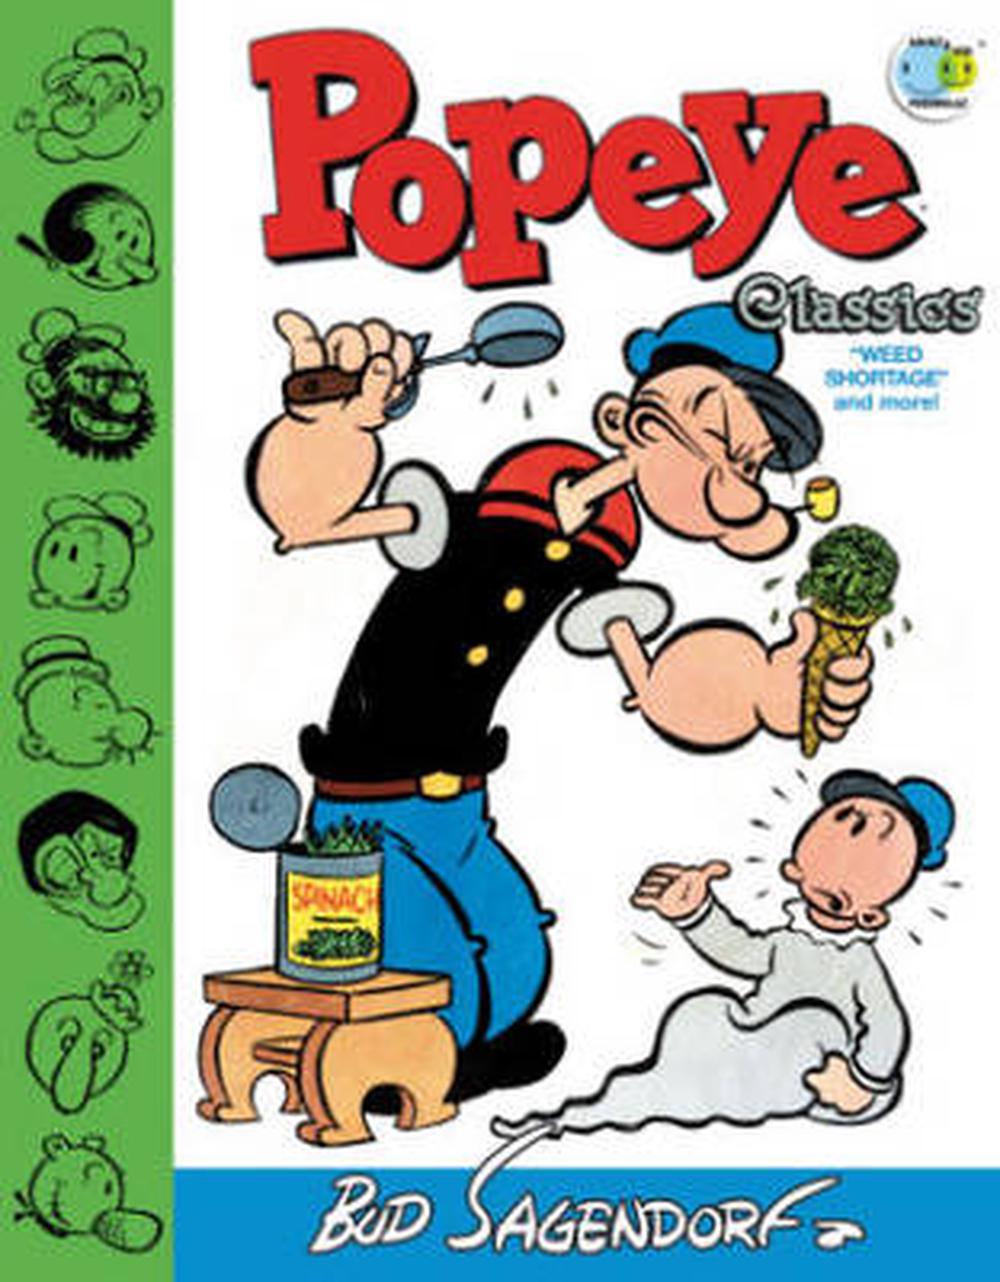 Popeye Classics Weed Shortage and More! by Bud Sagendorf (English ...